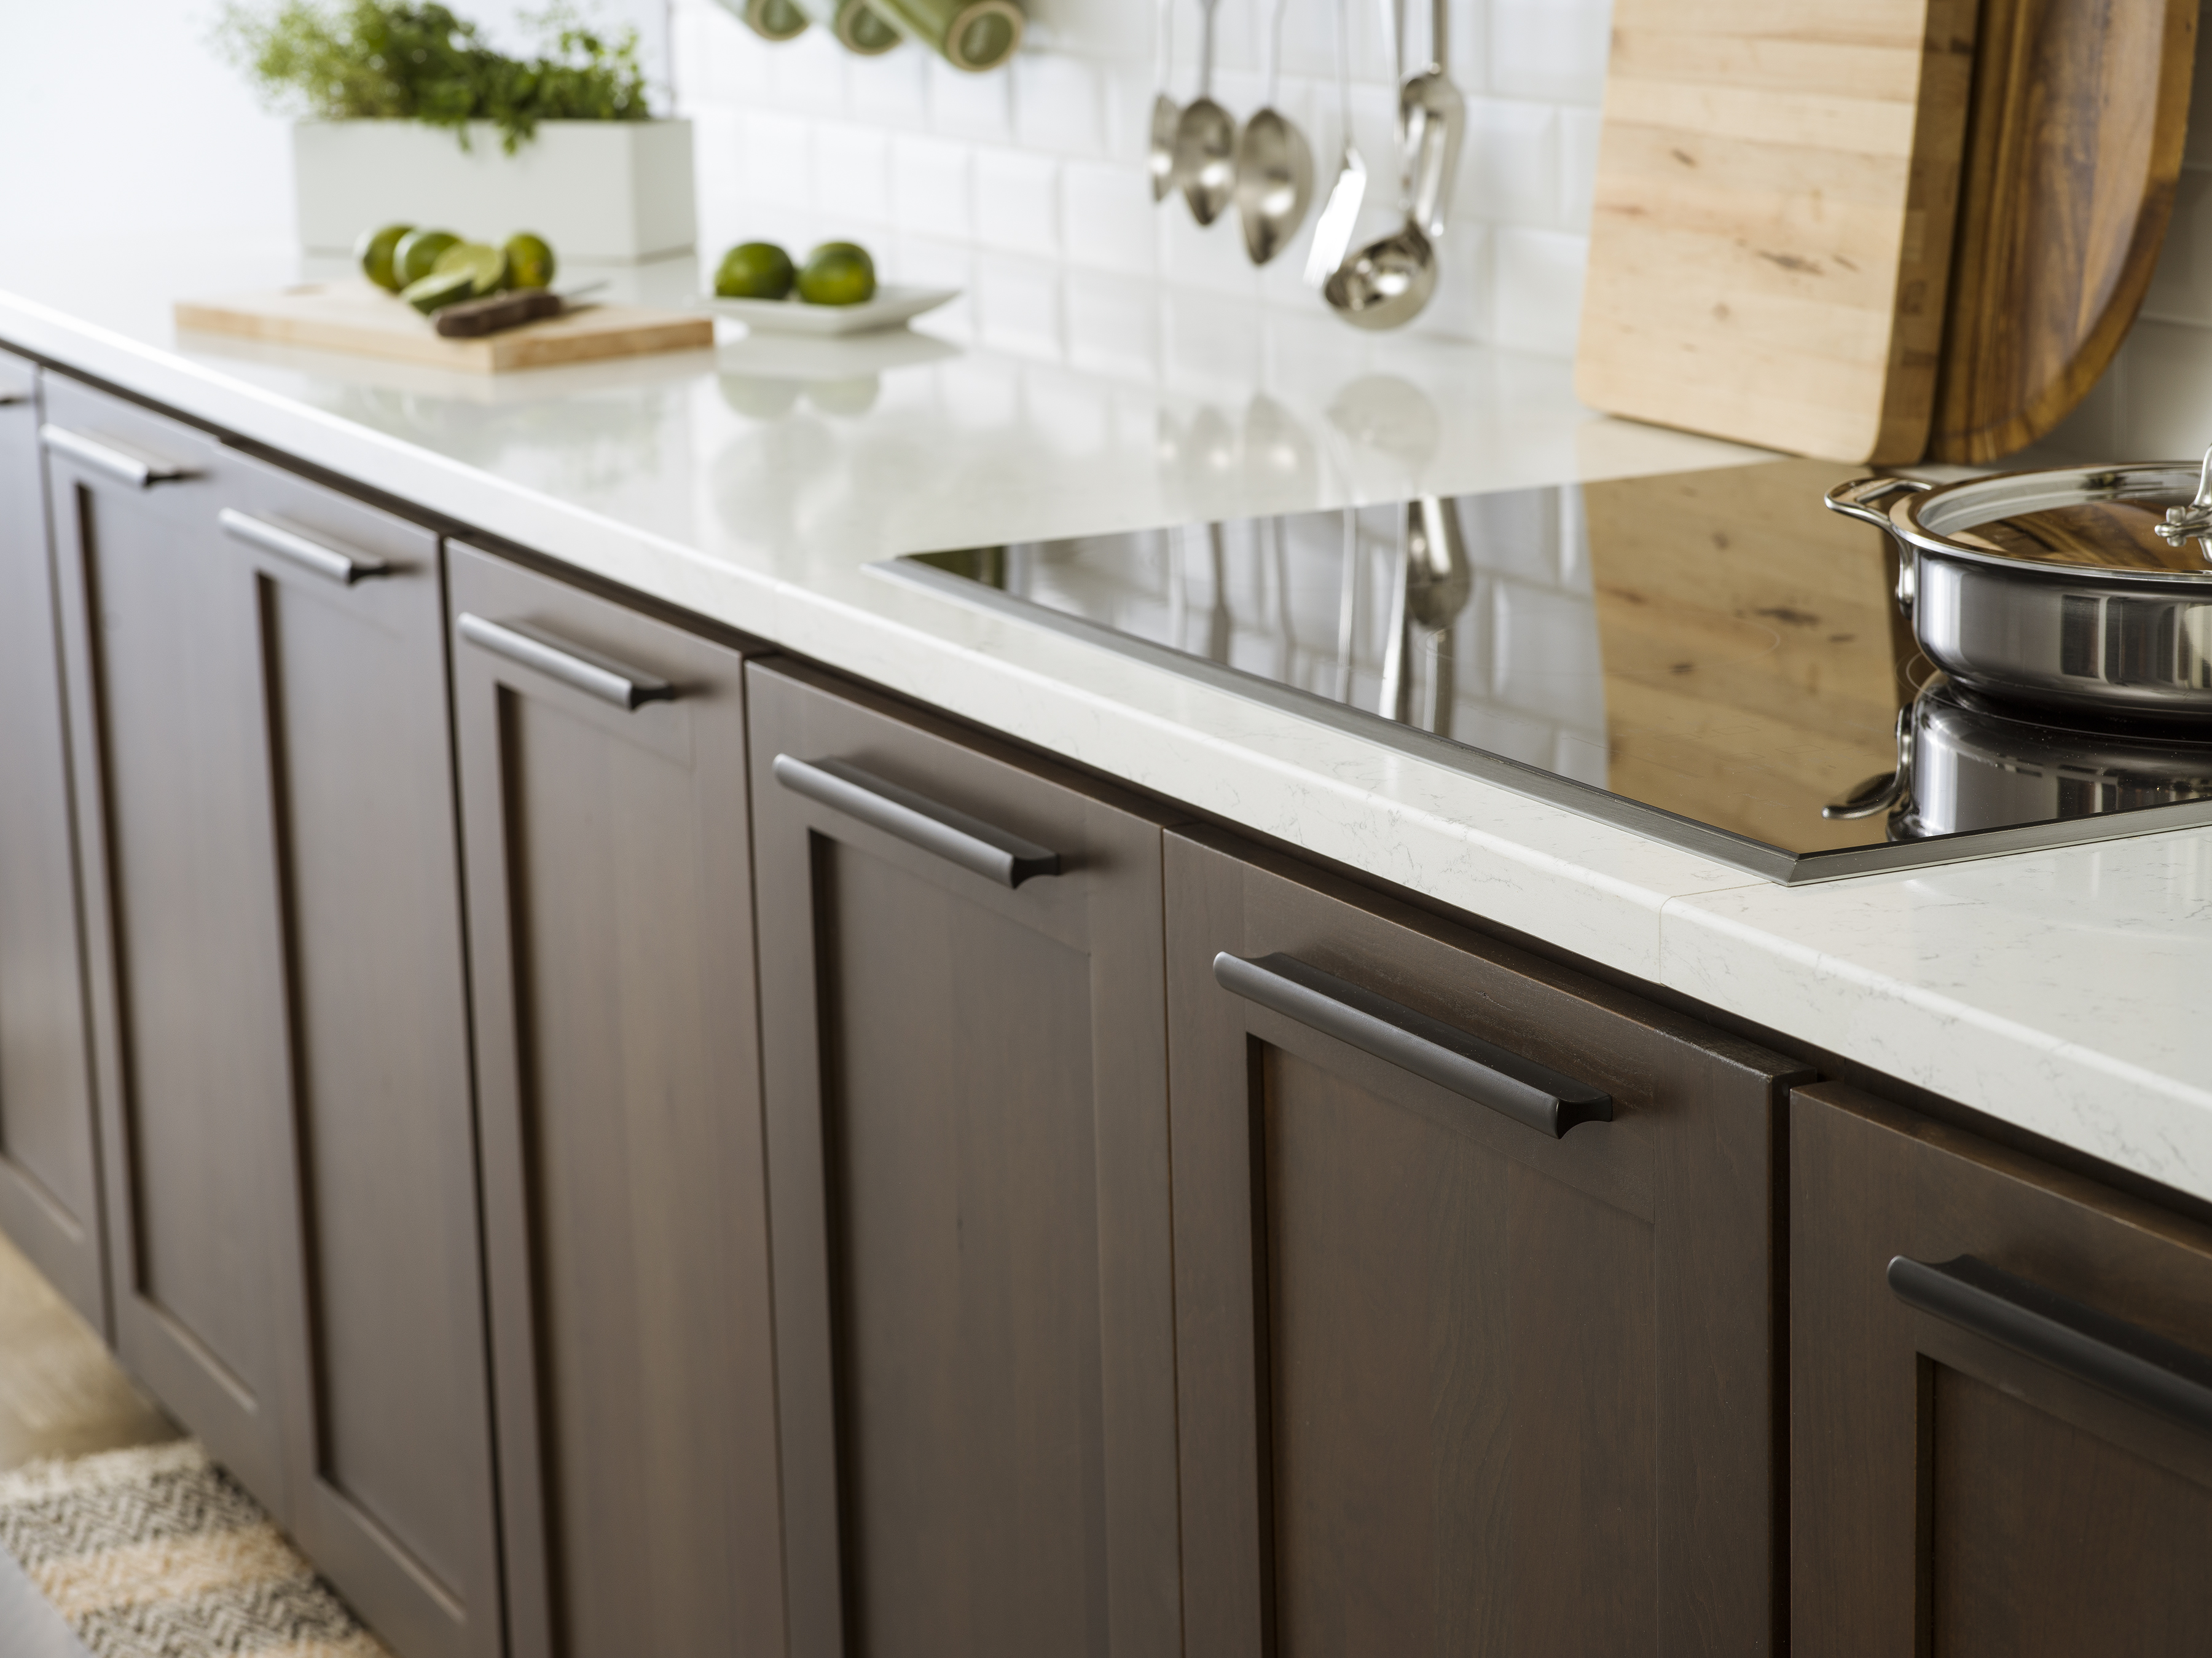 Cherry kitchen cabinets with a dark brown stain color with bright white countertops in a modern industrial style kitchen remodel.